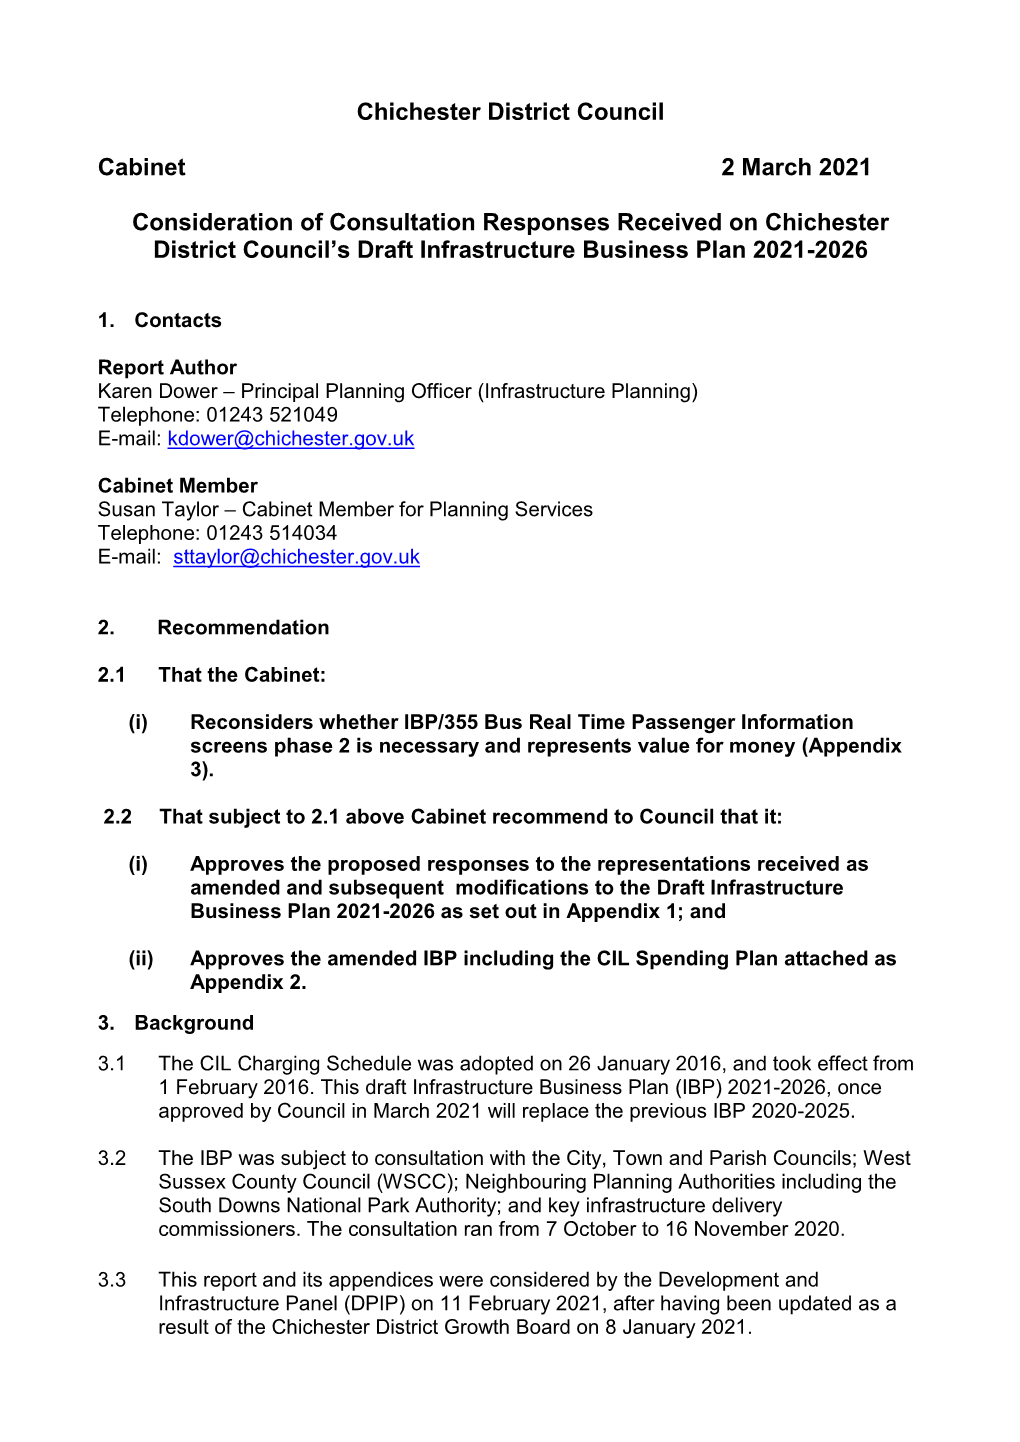 Consideration of Consultation Responses Received on Chichester District Council’S Draft Infrastructure Business Plan 2021-2026